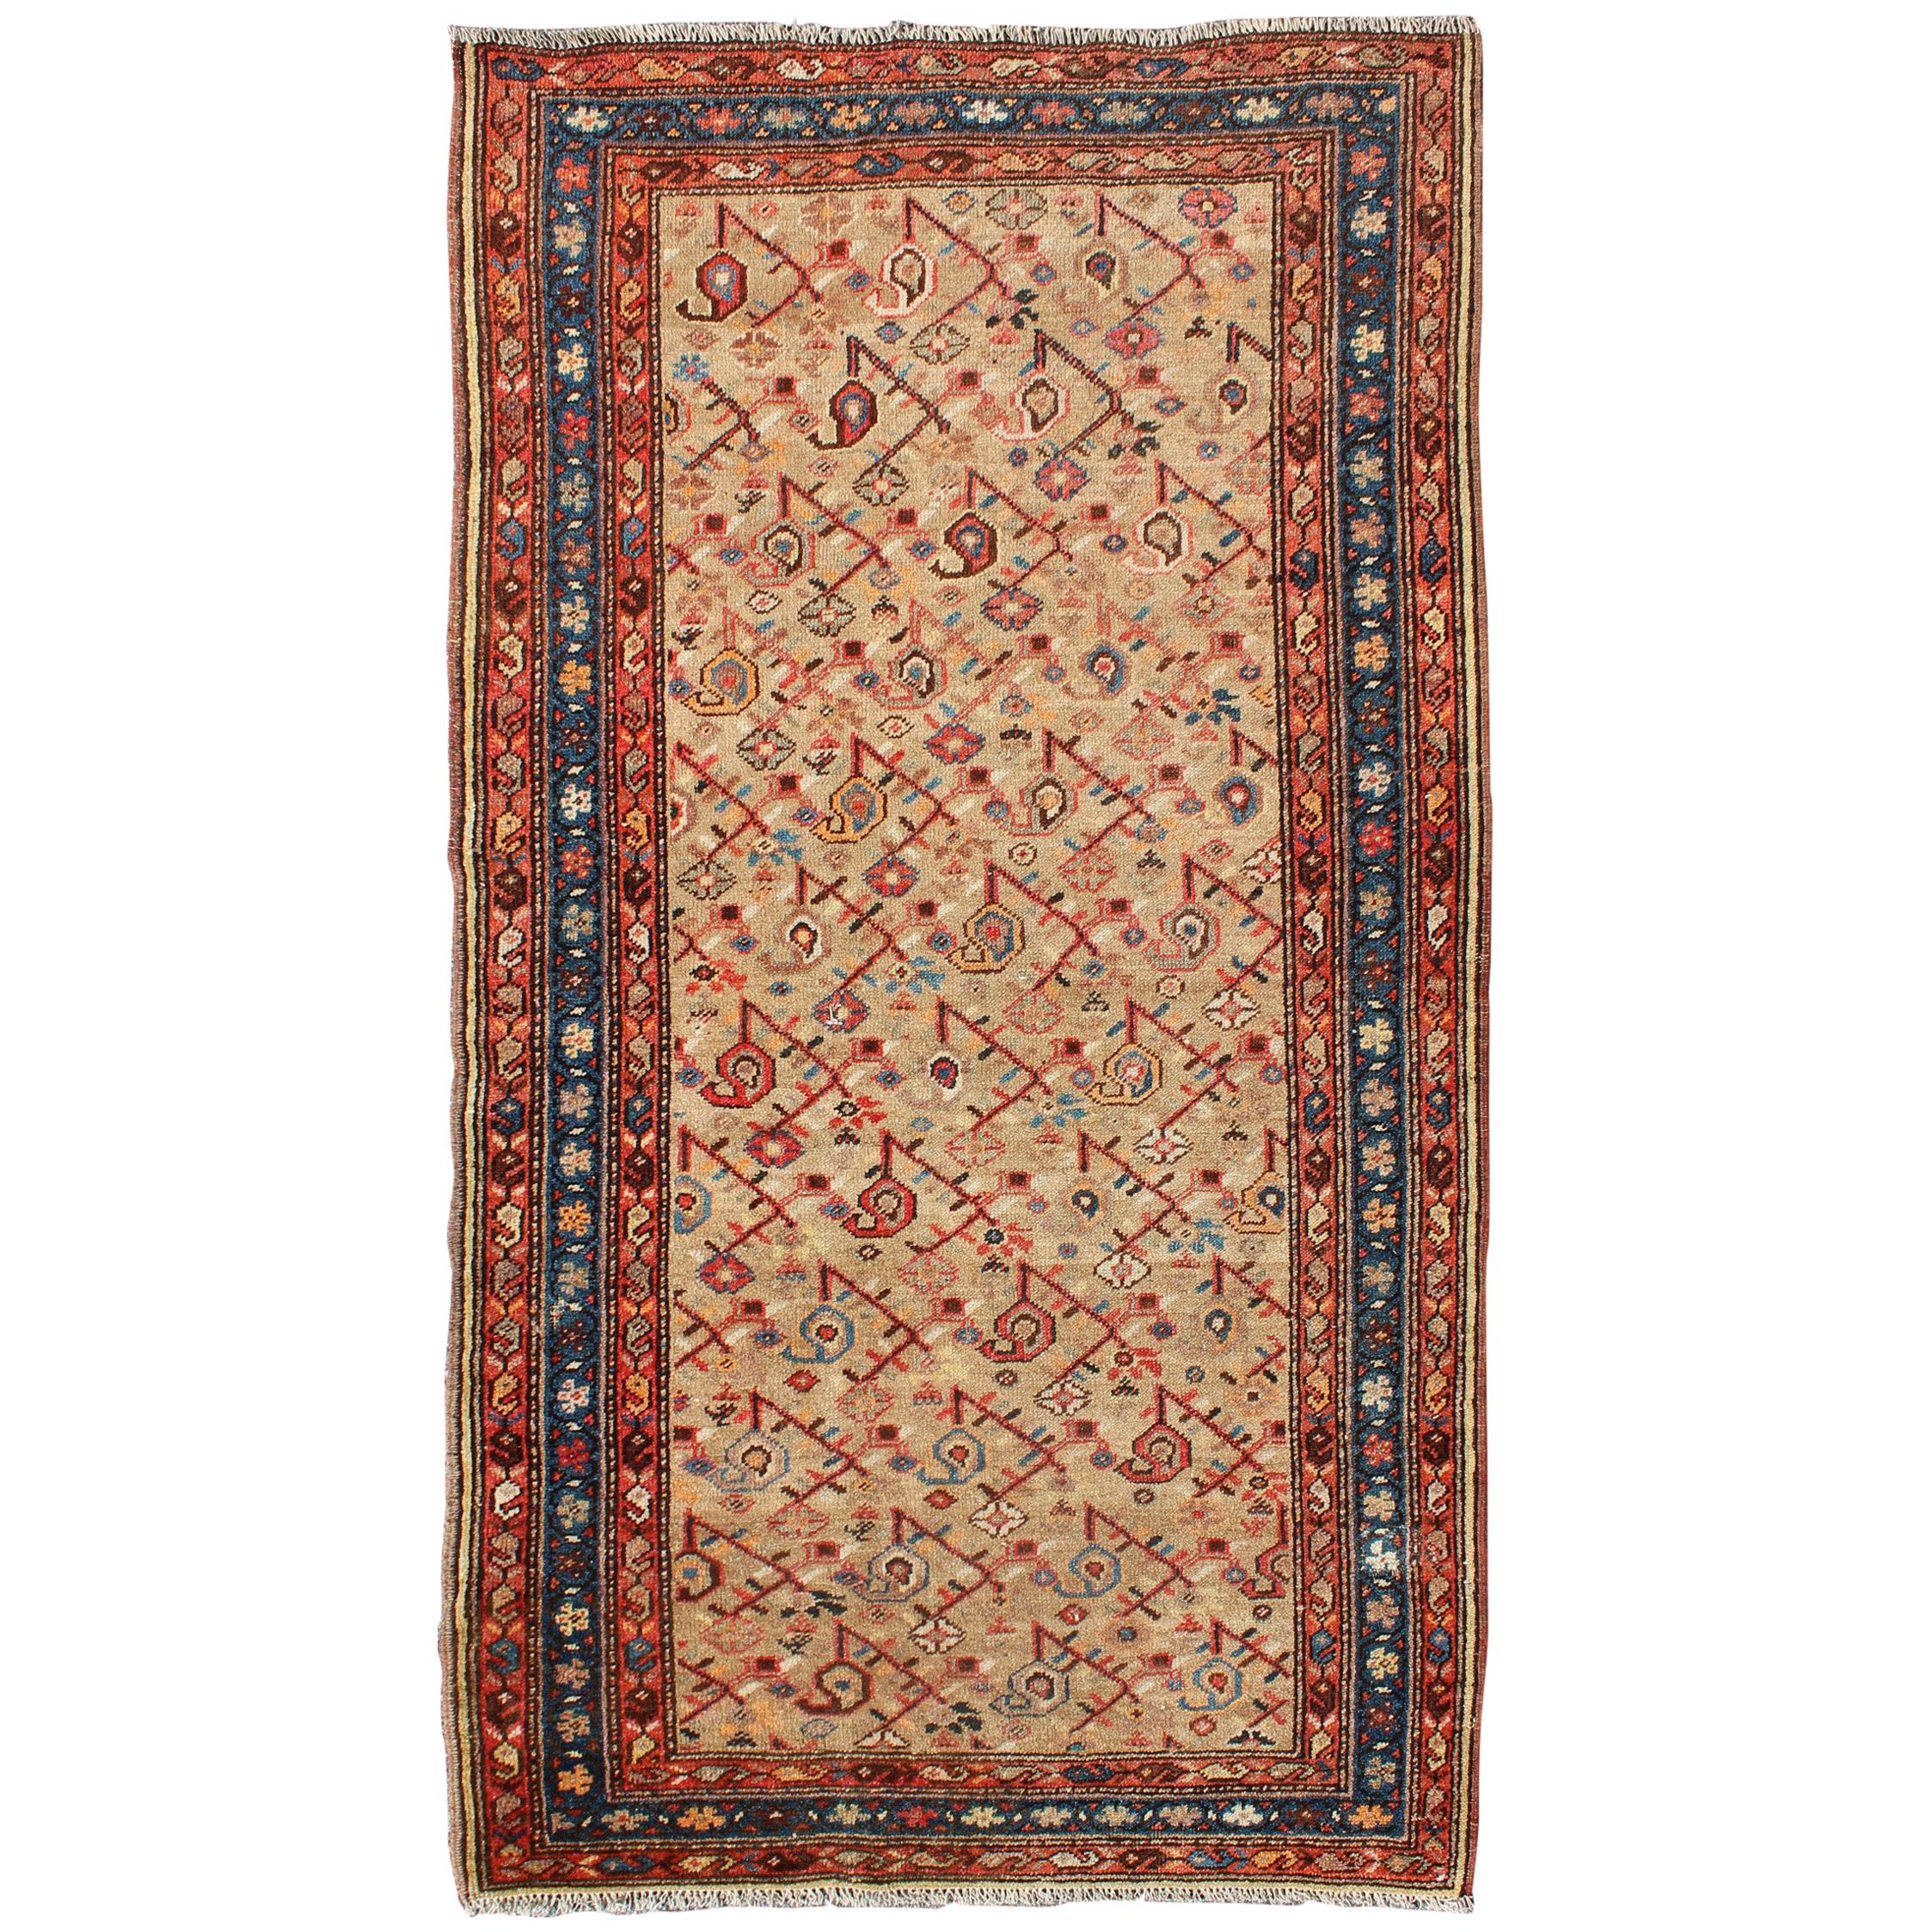 Antique N.W. Persian Malayer Rug with Free-Flowing All-Over Pattern, Sand Field